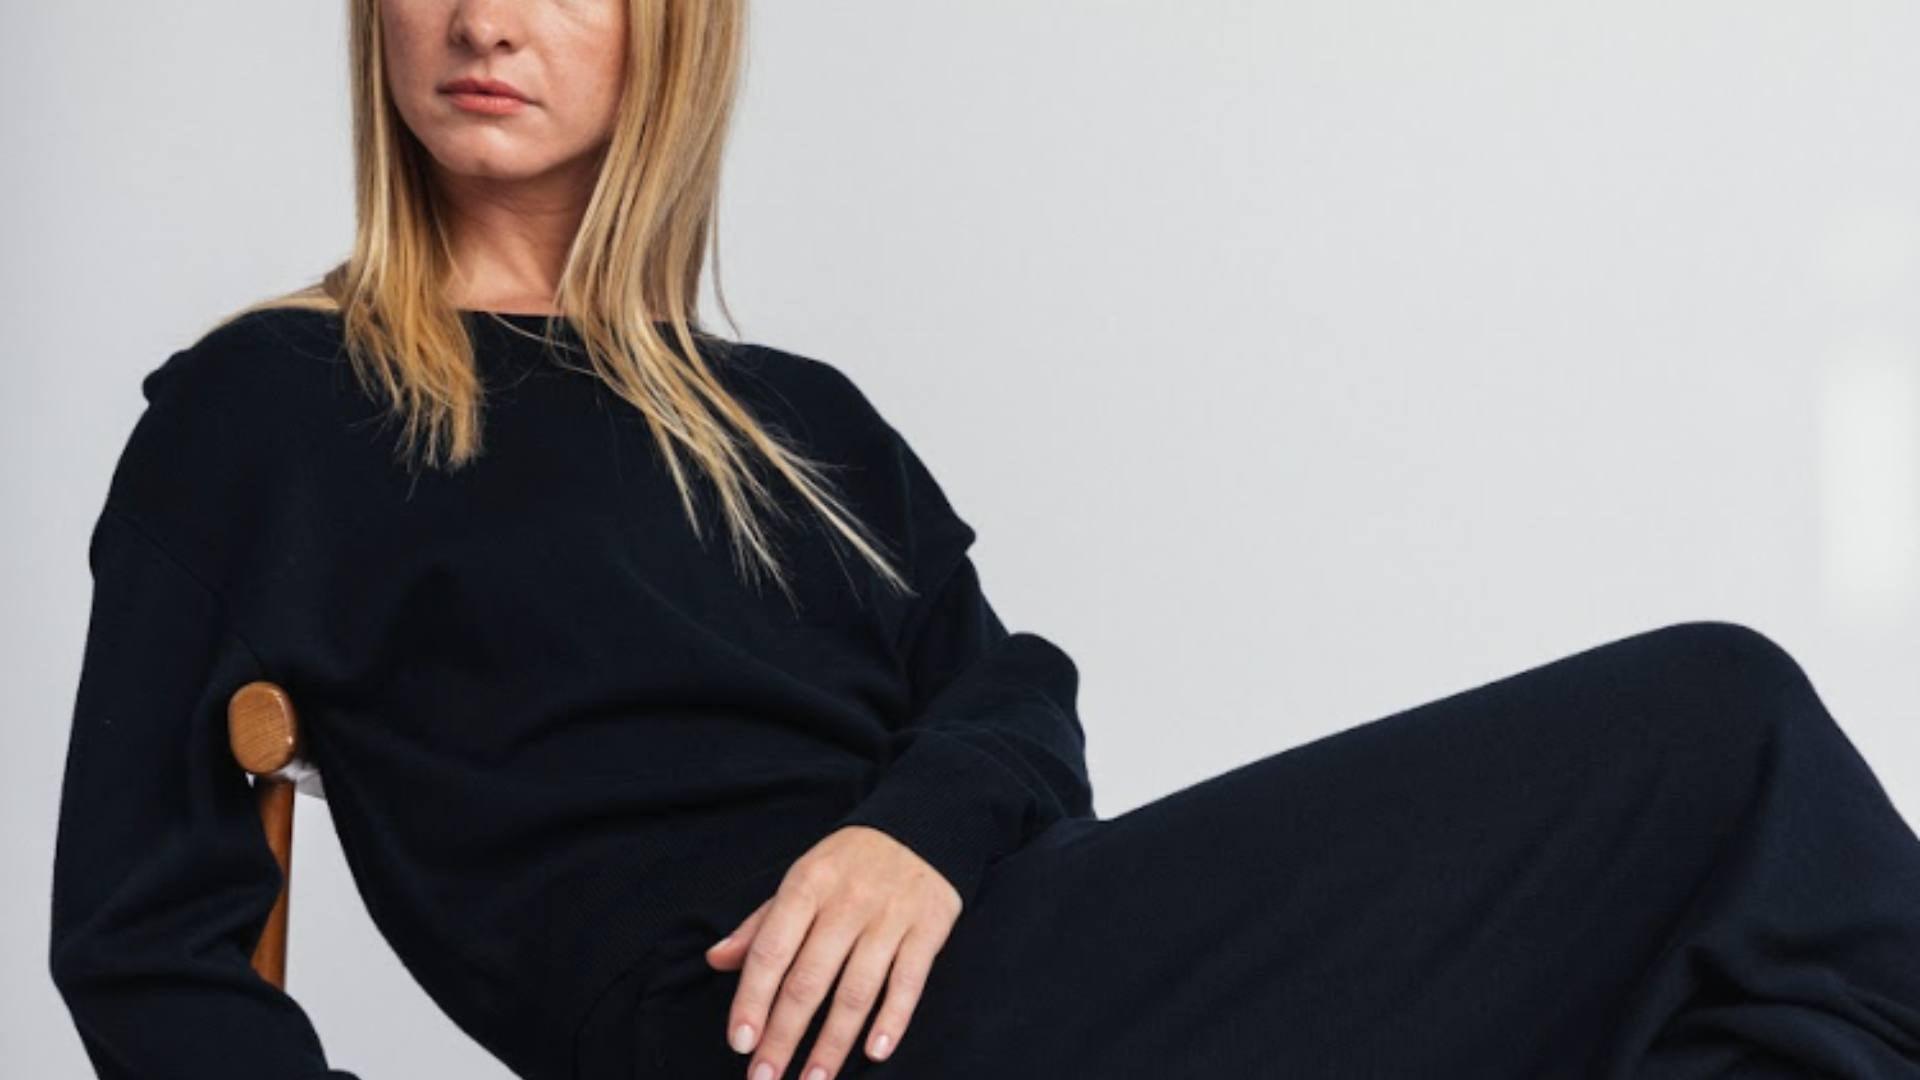 A blonde woman sits on a wooden chair and poses in a black, sustainable, conscious outfit.